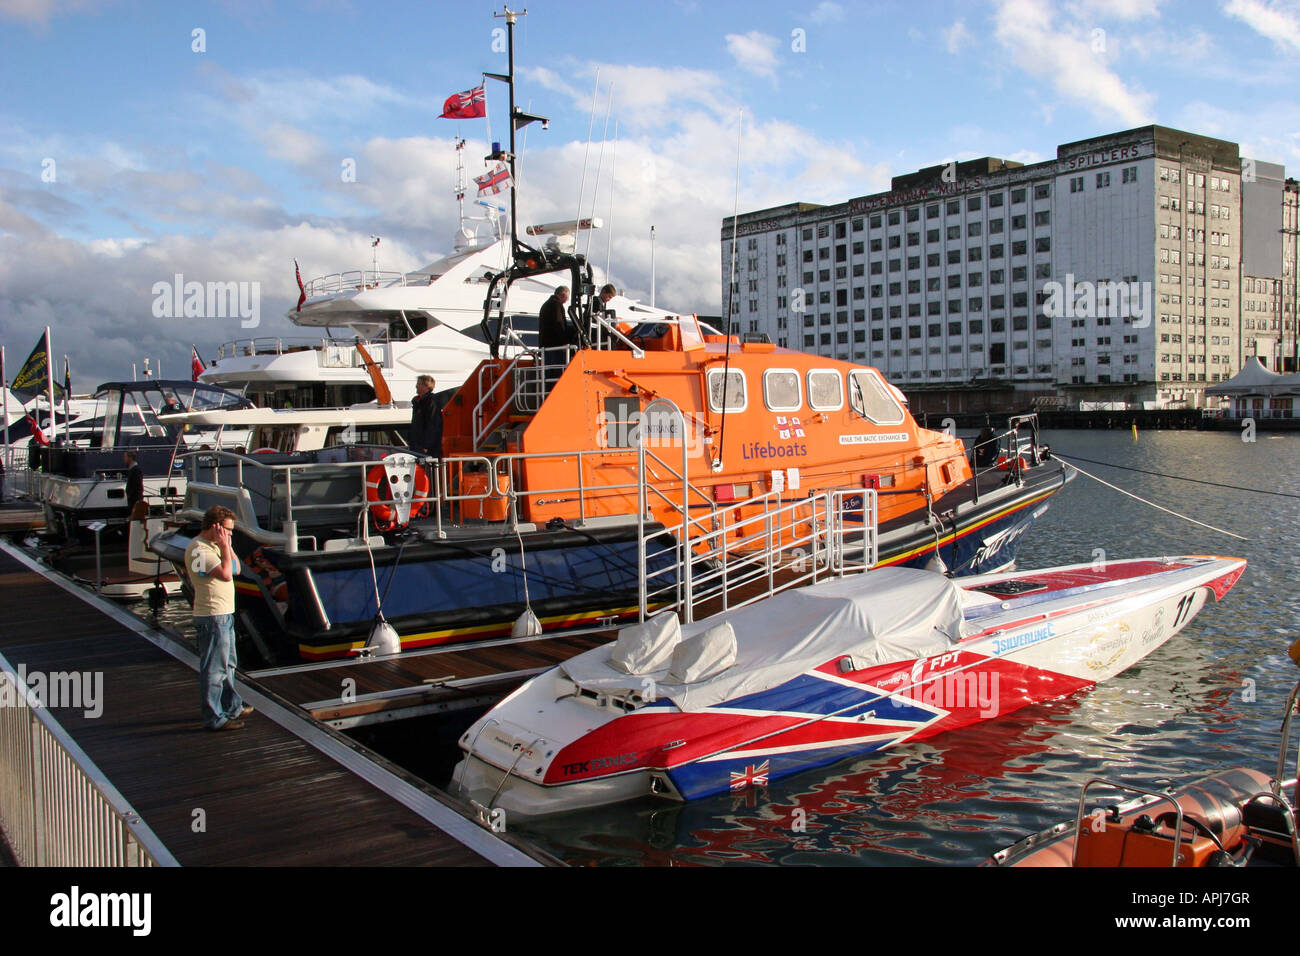 RNLI Lifeboat Tamar class outside in the Royal Victoria dock at the Collins Stewart London Boat Show Excel  London Stock Photo